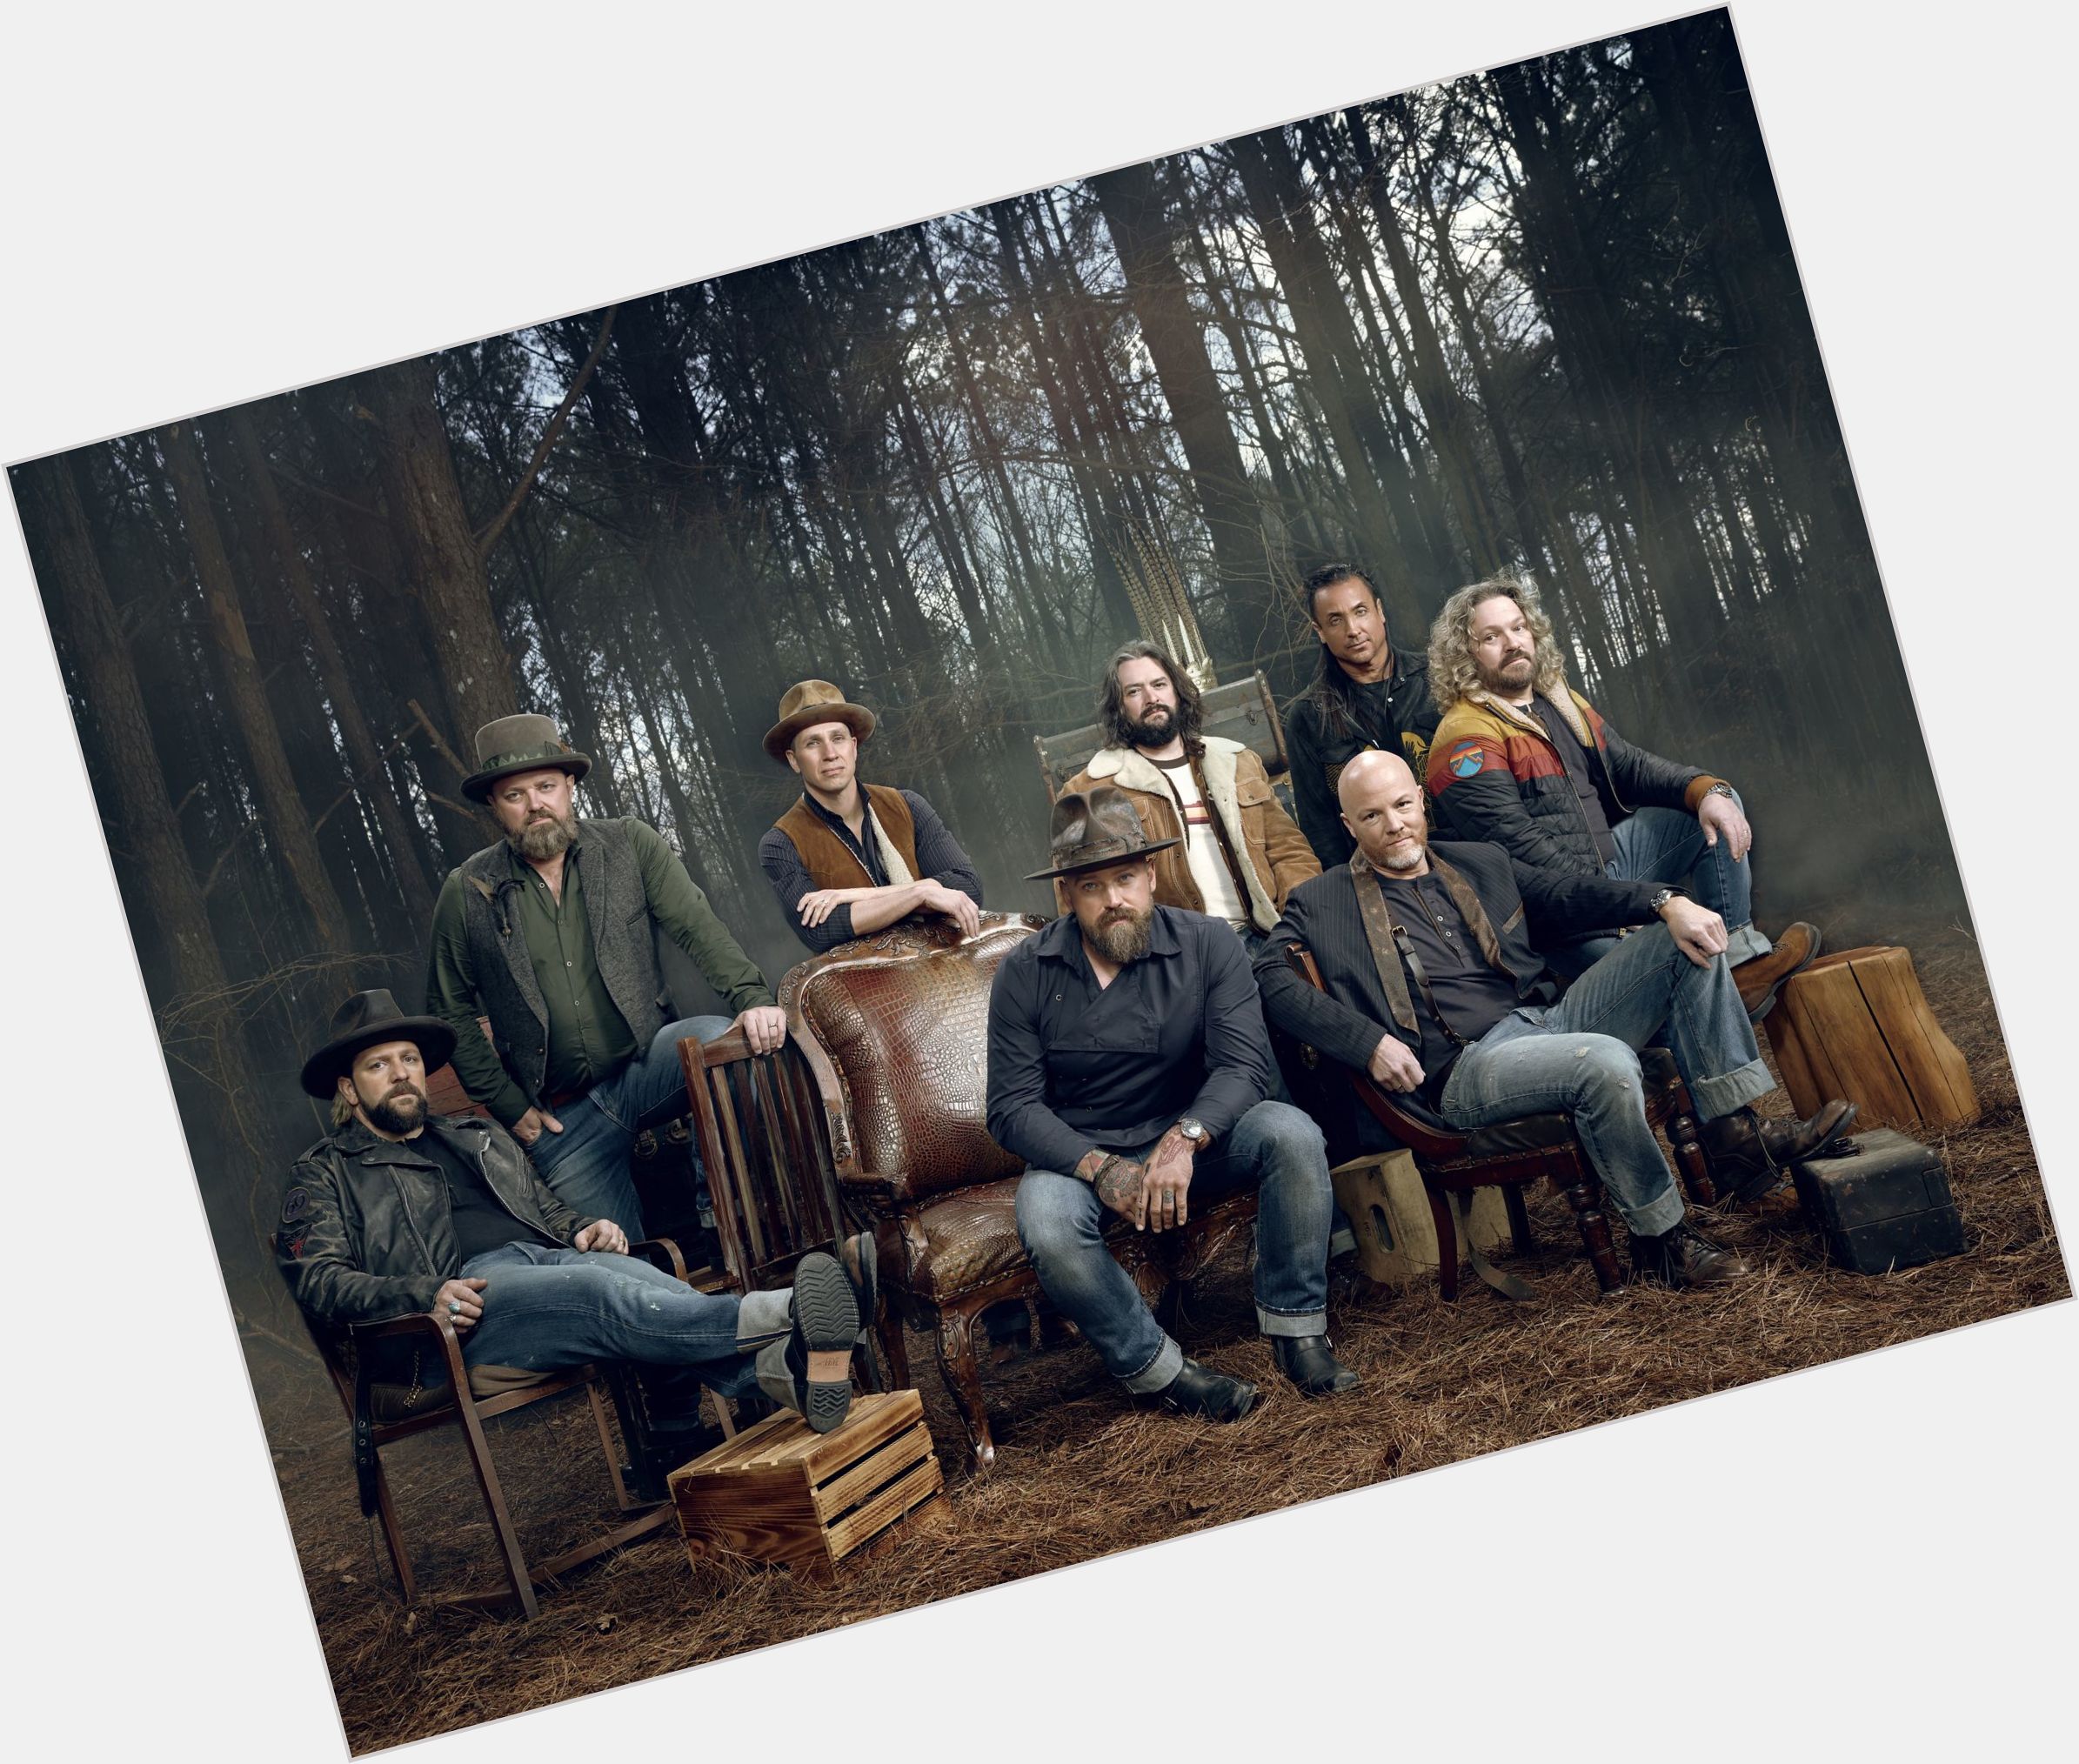 <a href="/hot-men/zac-brown-band/is-he-good-live-country-touring-2014-racist">Zac Brown Band</a>  